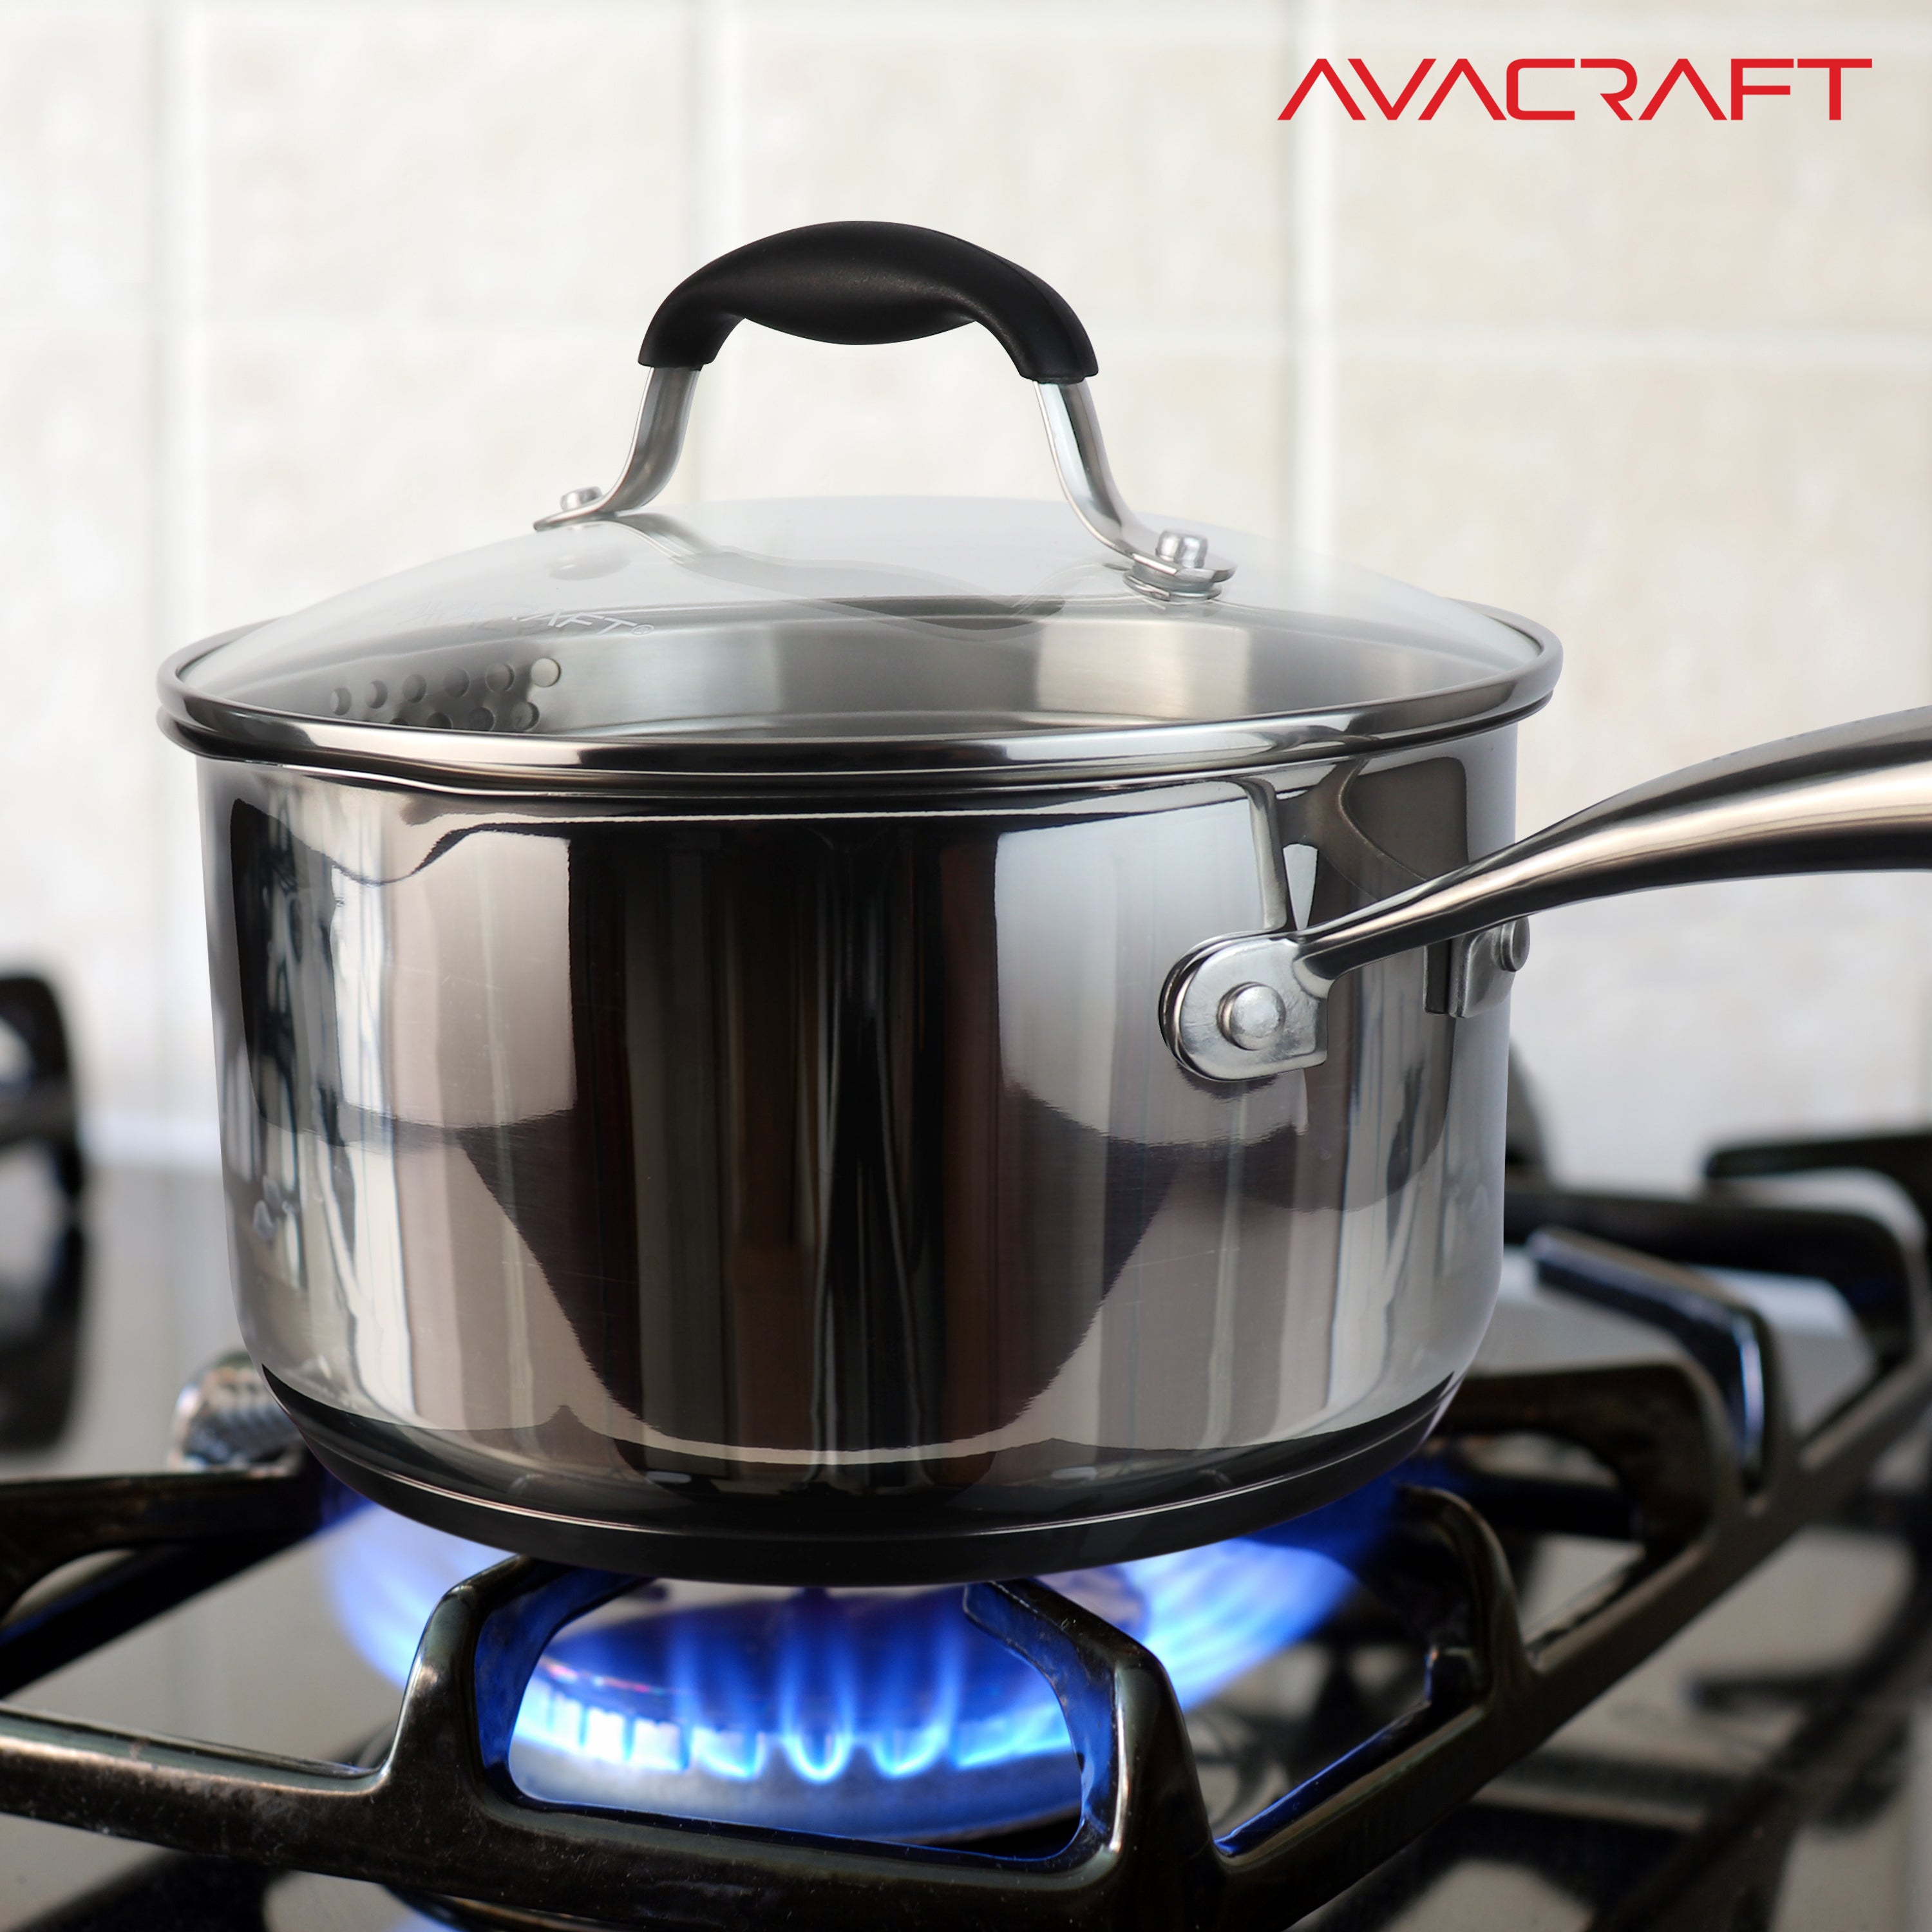 AVACRAFT Tri-Ply Stainless Steel Saucepan with Glass Strainer Lid, Two Side Spouts, Multipurpose Sauce Pan with Lid, Sauce Pot